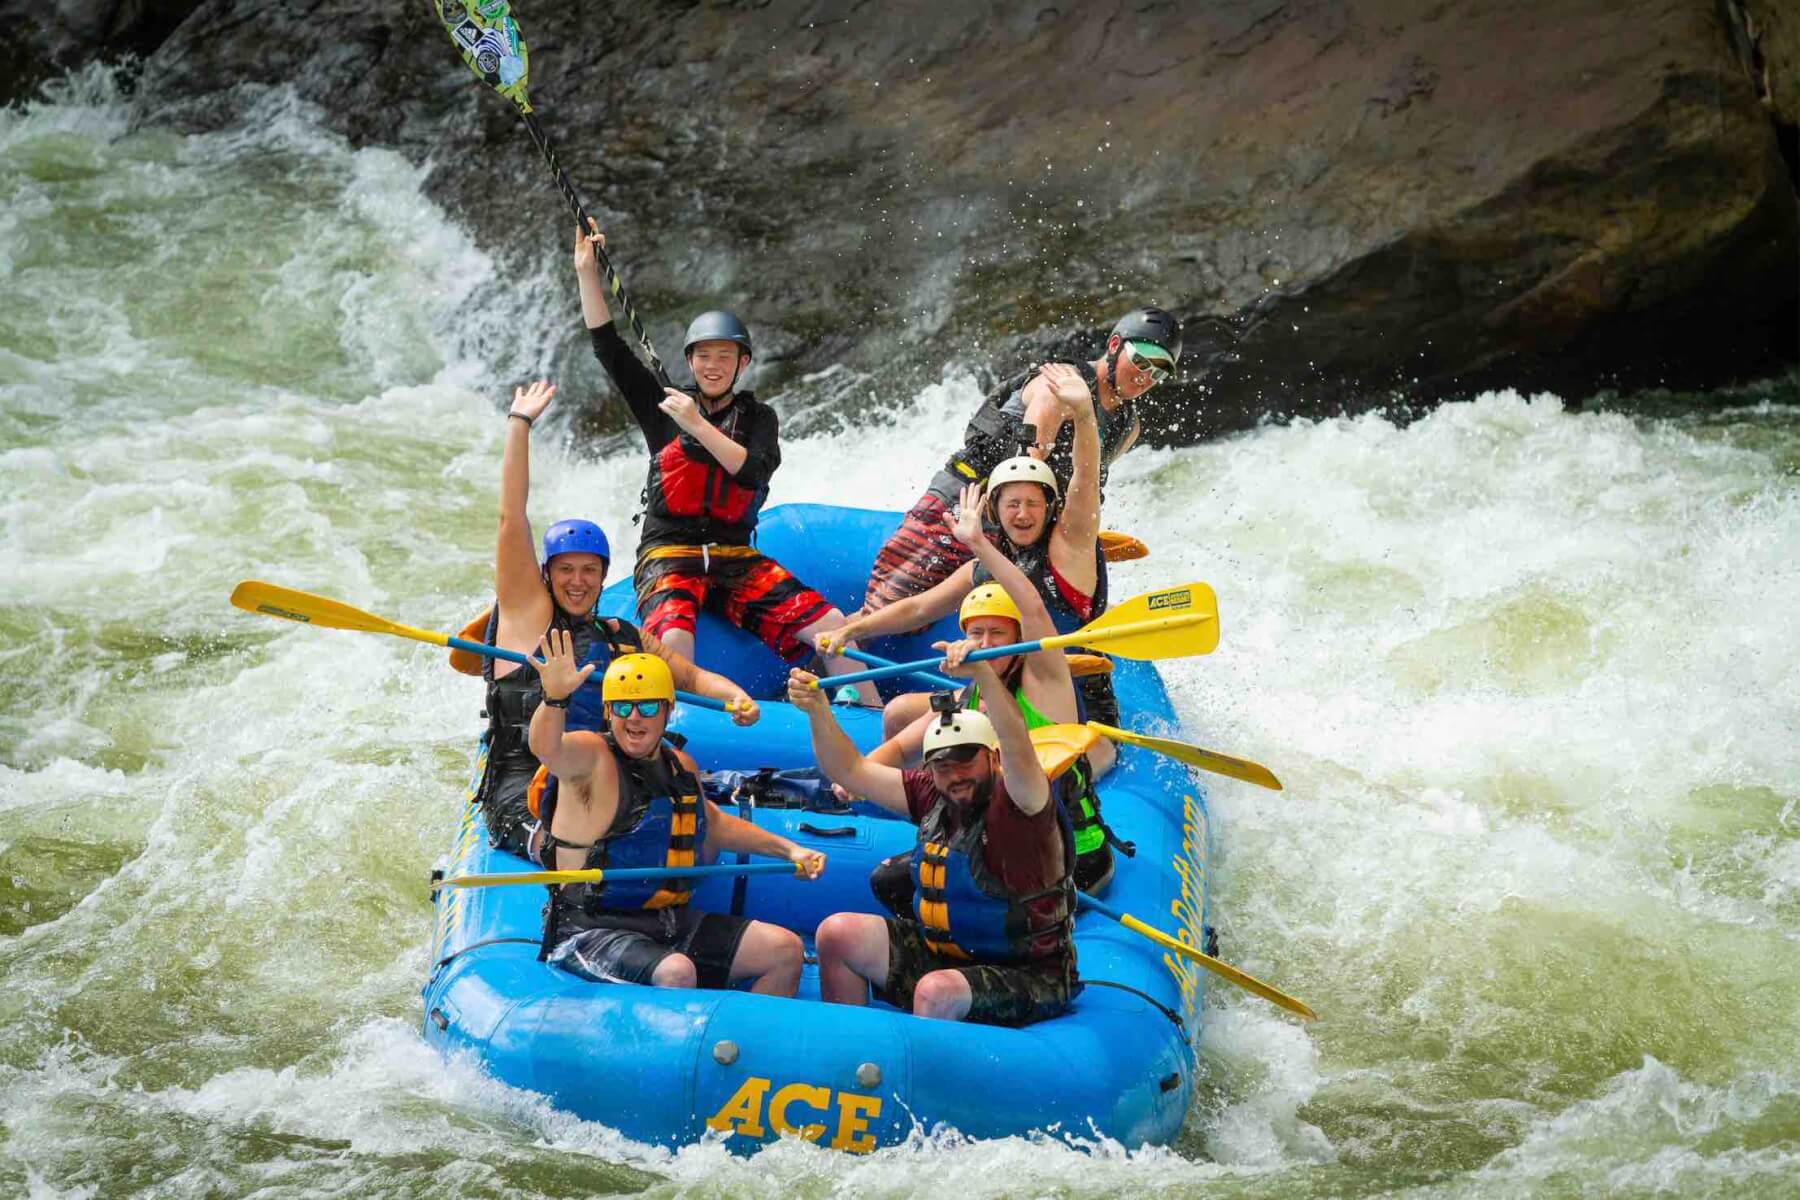 whitewater rafting with ace adventure resort in the new river gorge at lower keeney rapid